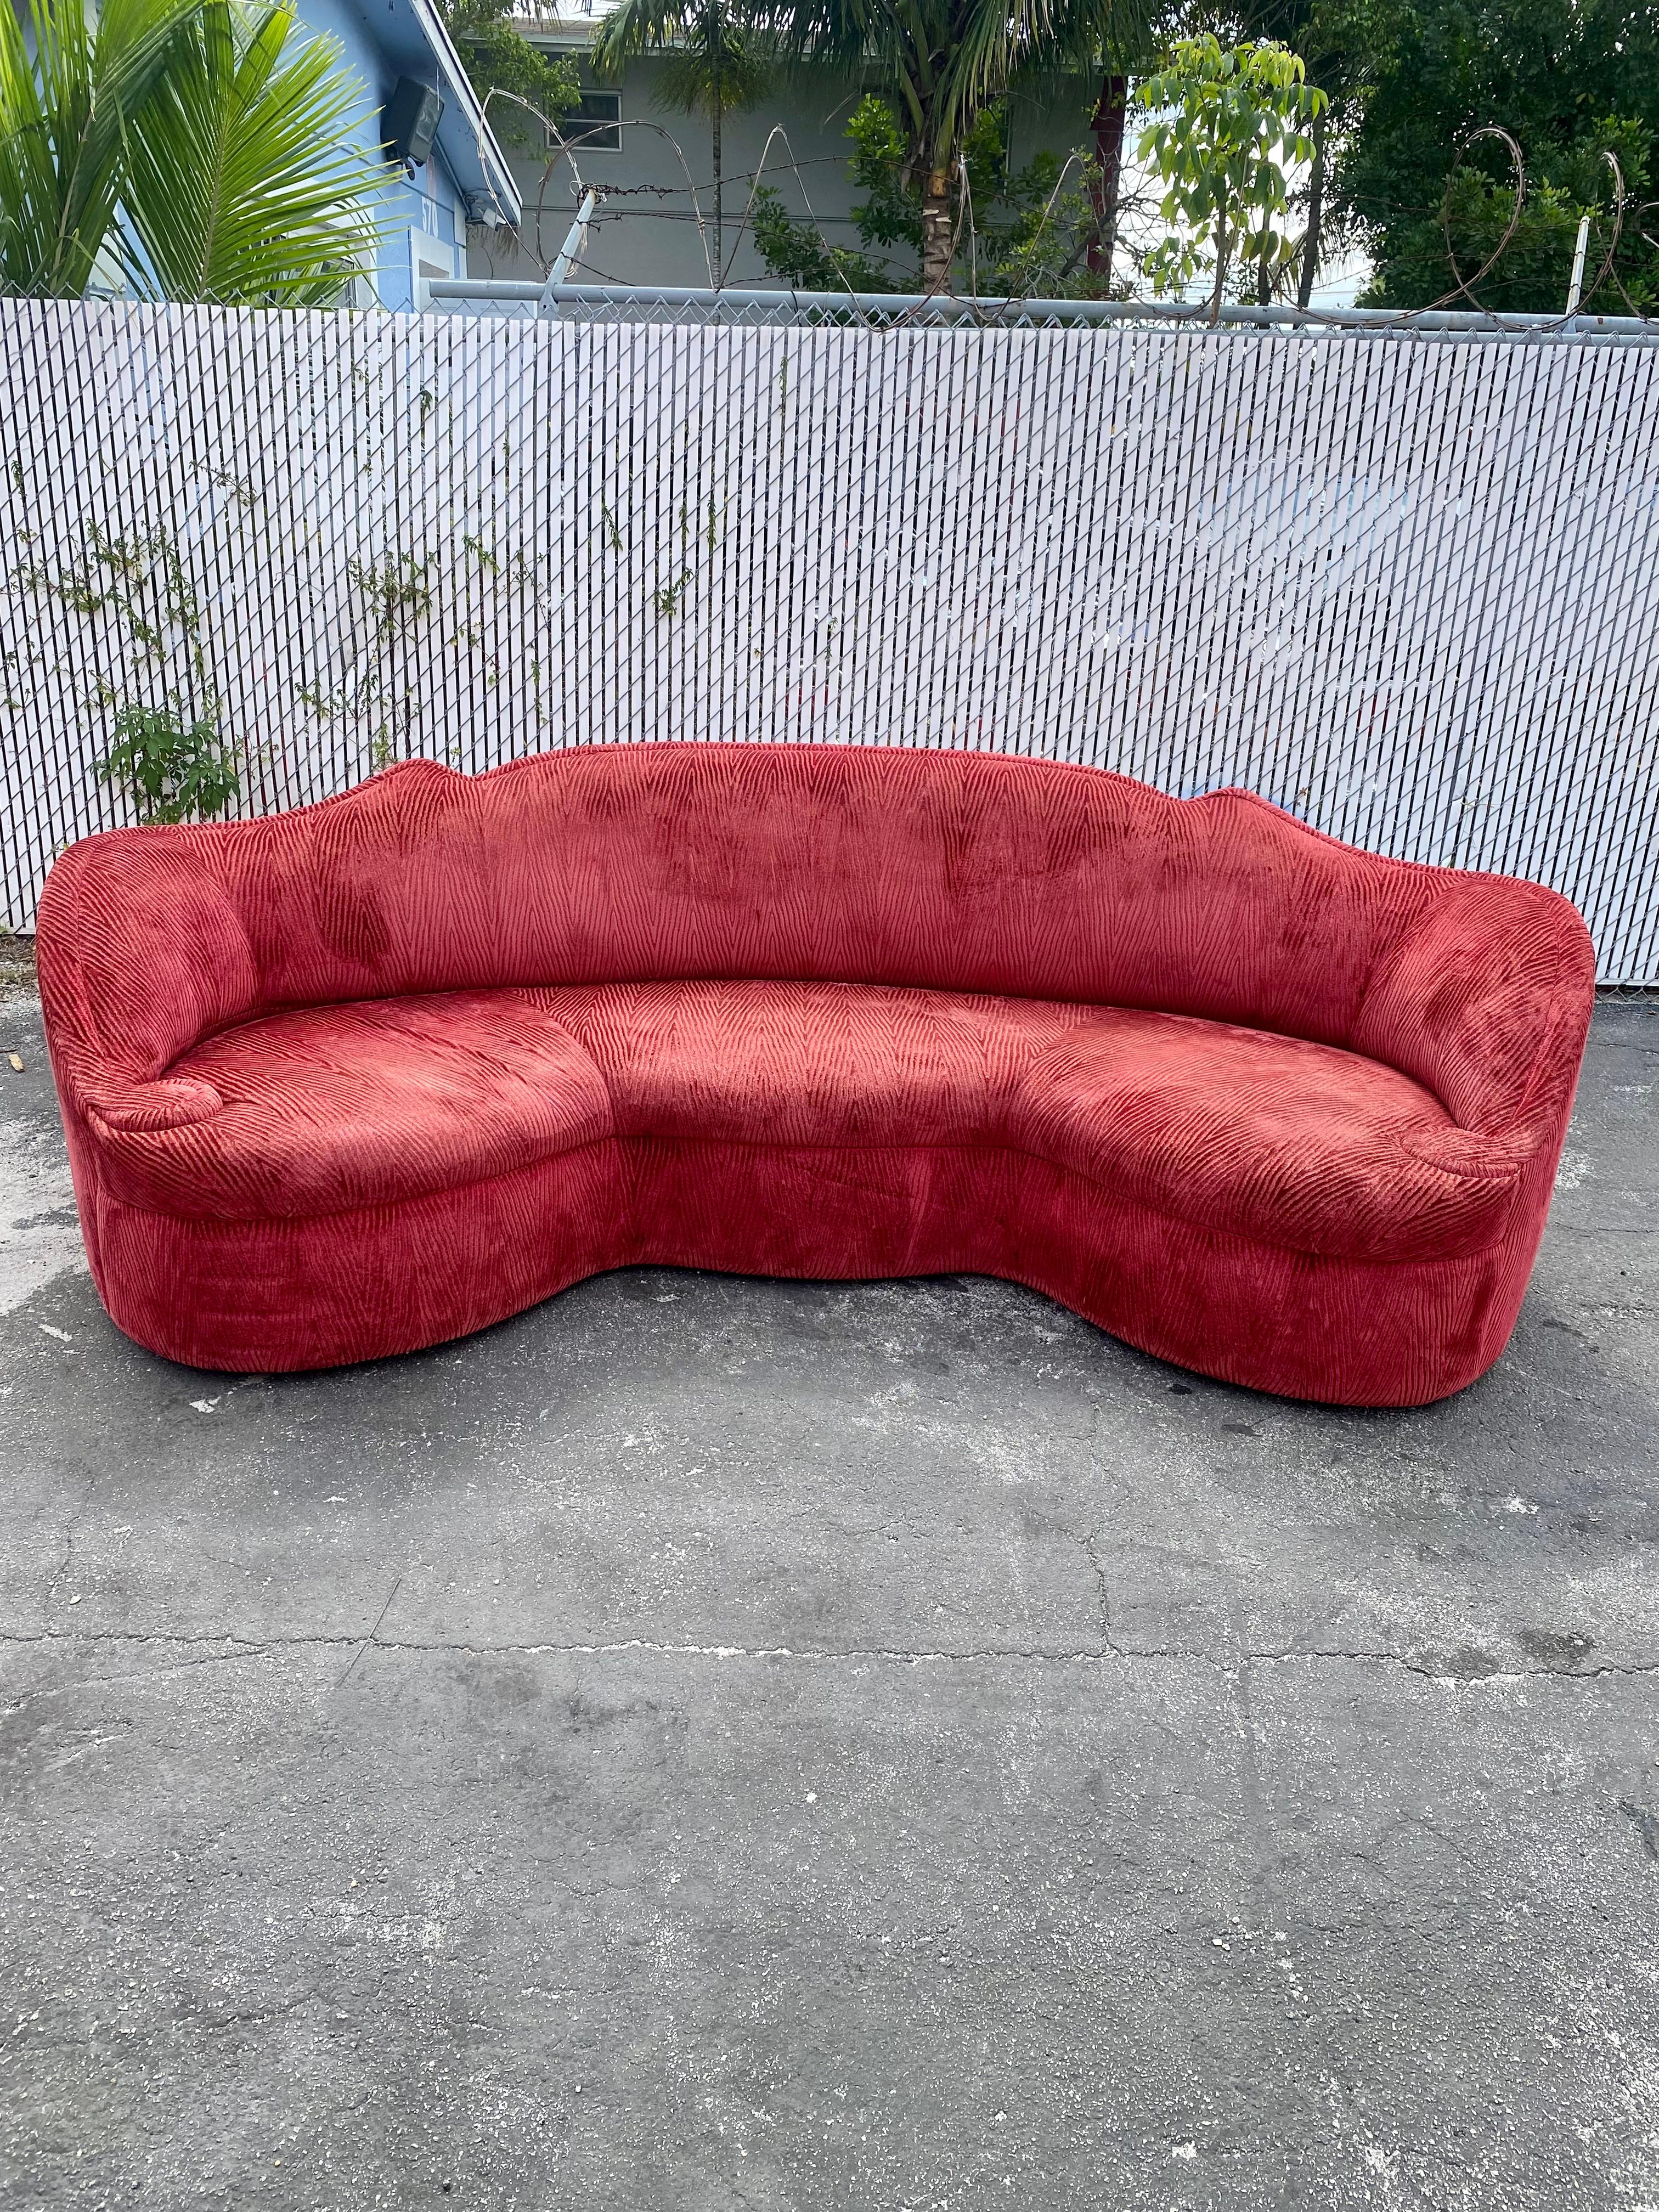 1970s Monumental Maroon Schiaparelli Velvet Curved Sofa In Good Condition For Sale In Fort Lauderdale, FL